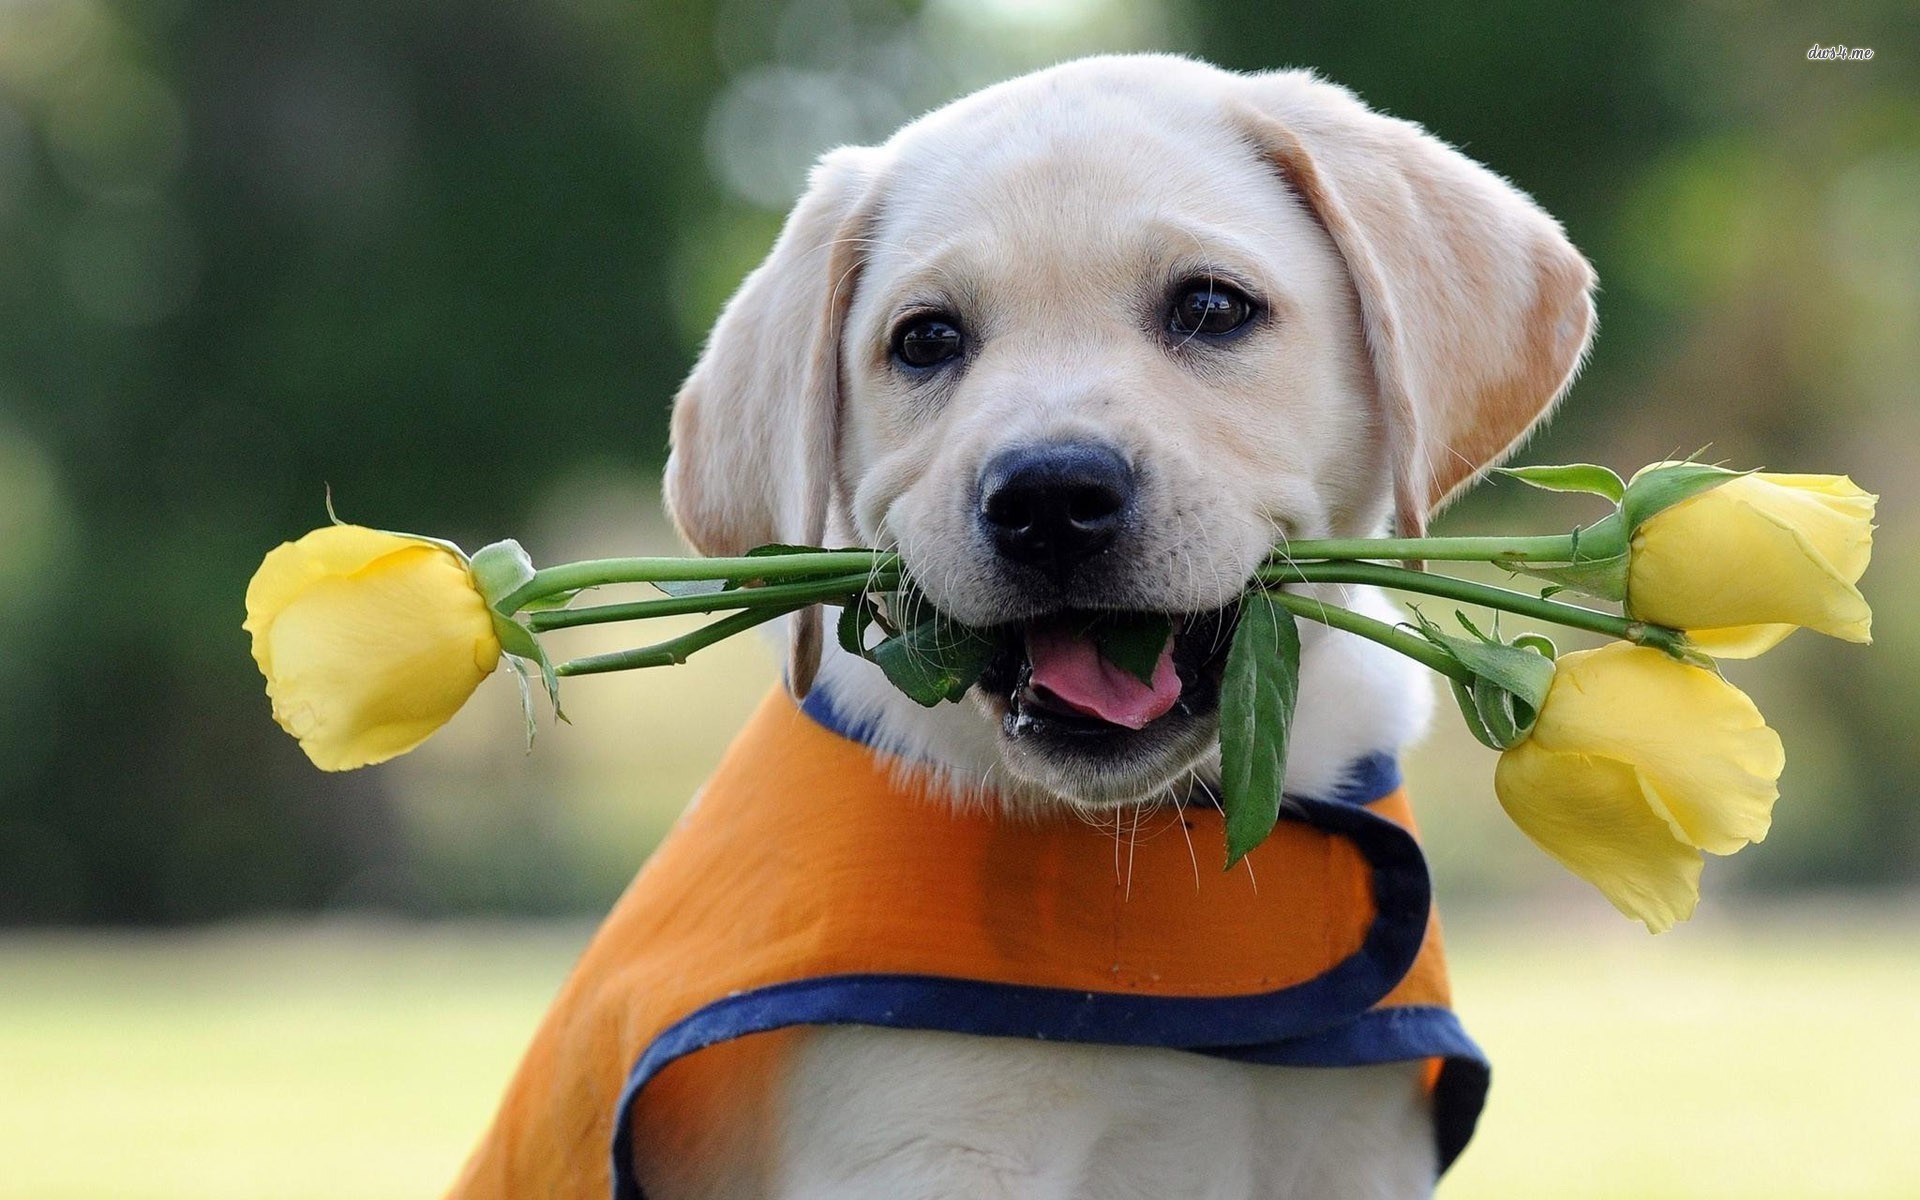 1920x1200 Labrador puppy with yellow roses Animal HD desktop wallpaper, Rose wallpaper,  Dog wallpaper, Puppy wallpaper, Labrador wallpaper - Animals no.